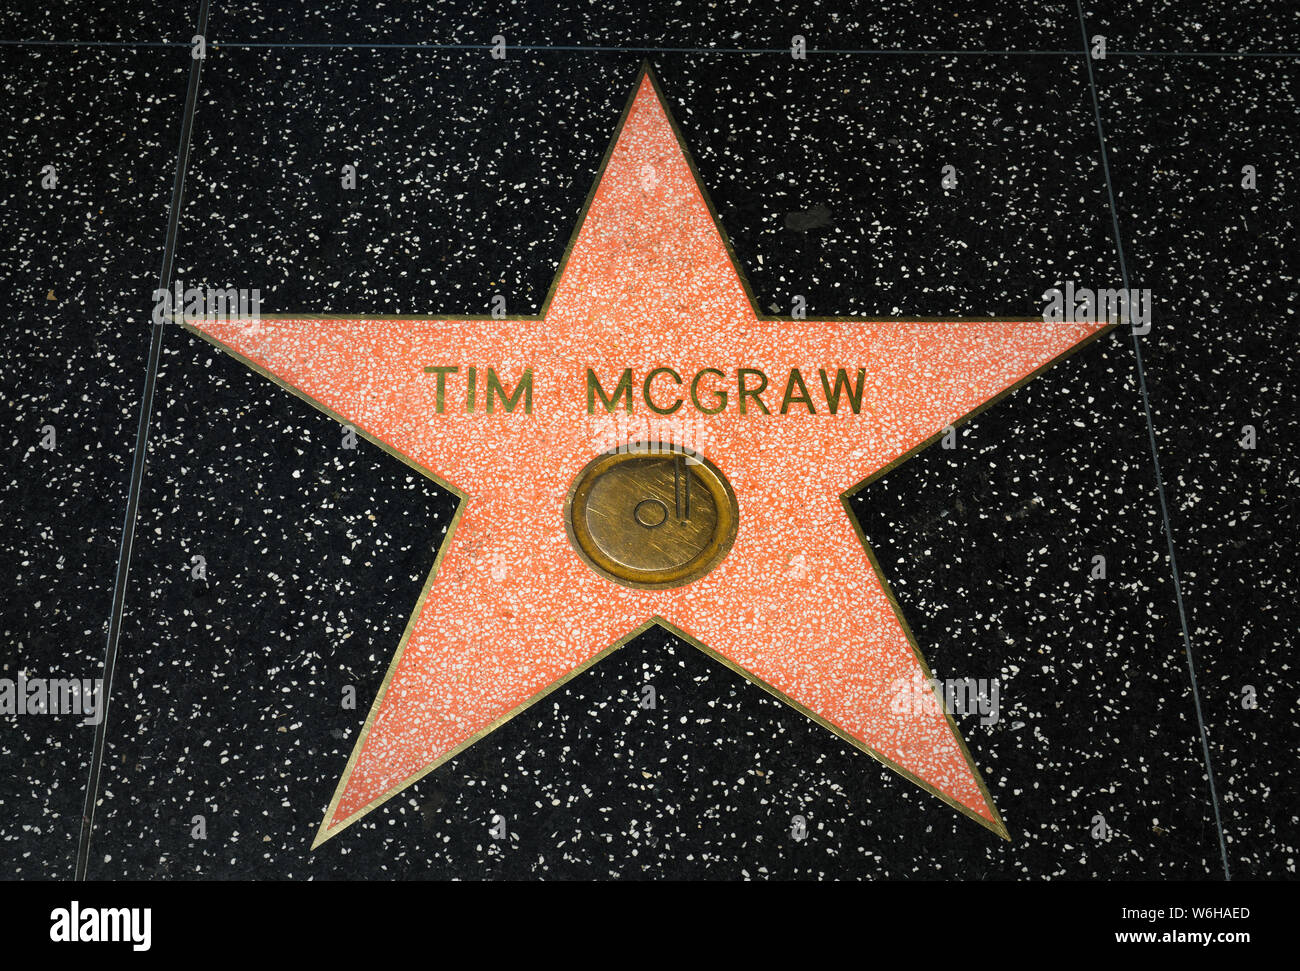 Celebrity Star on the Hollywood Walk of Fame Stock Photo